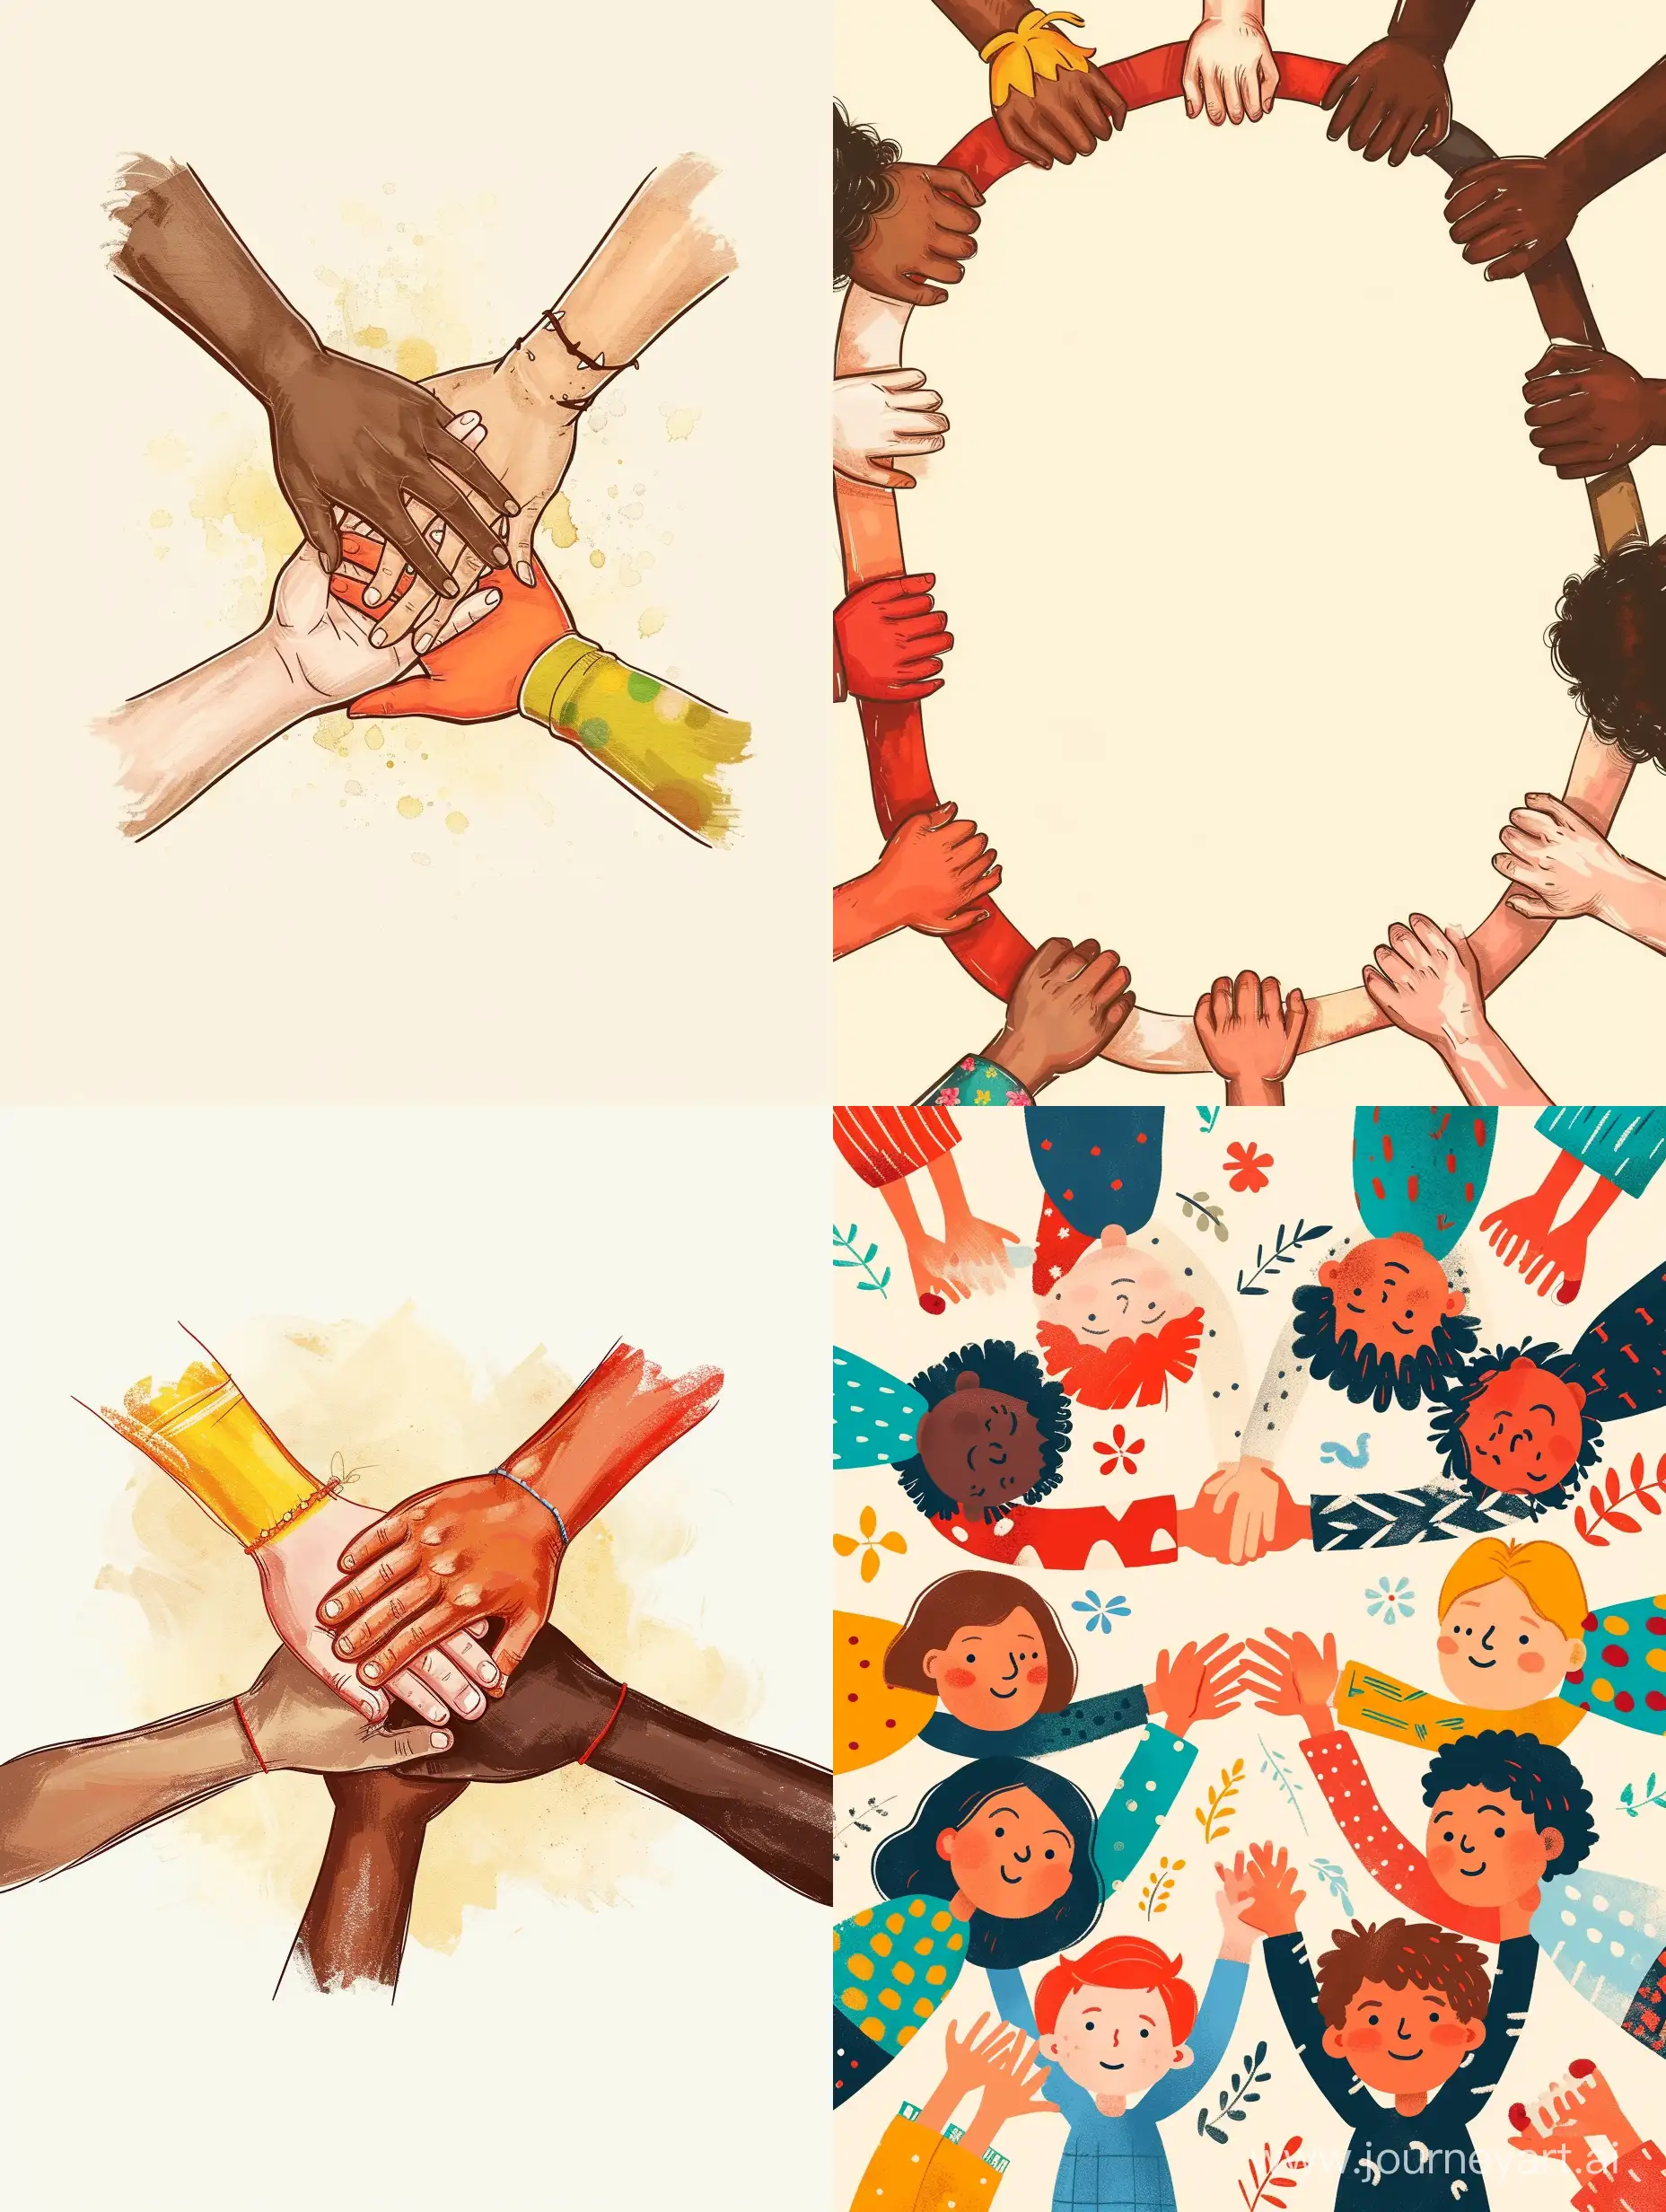 kids from different nations with different color skins, hands together, illustration style, style of pascal champions illustrations, not much details, with simple light color background